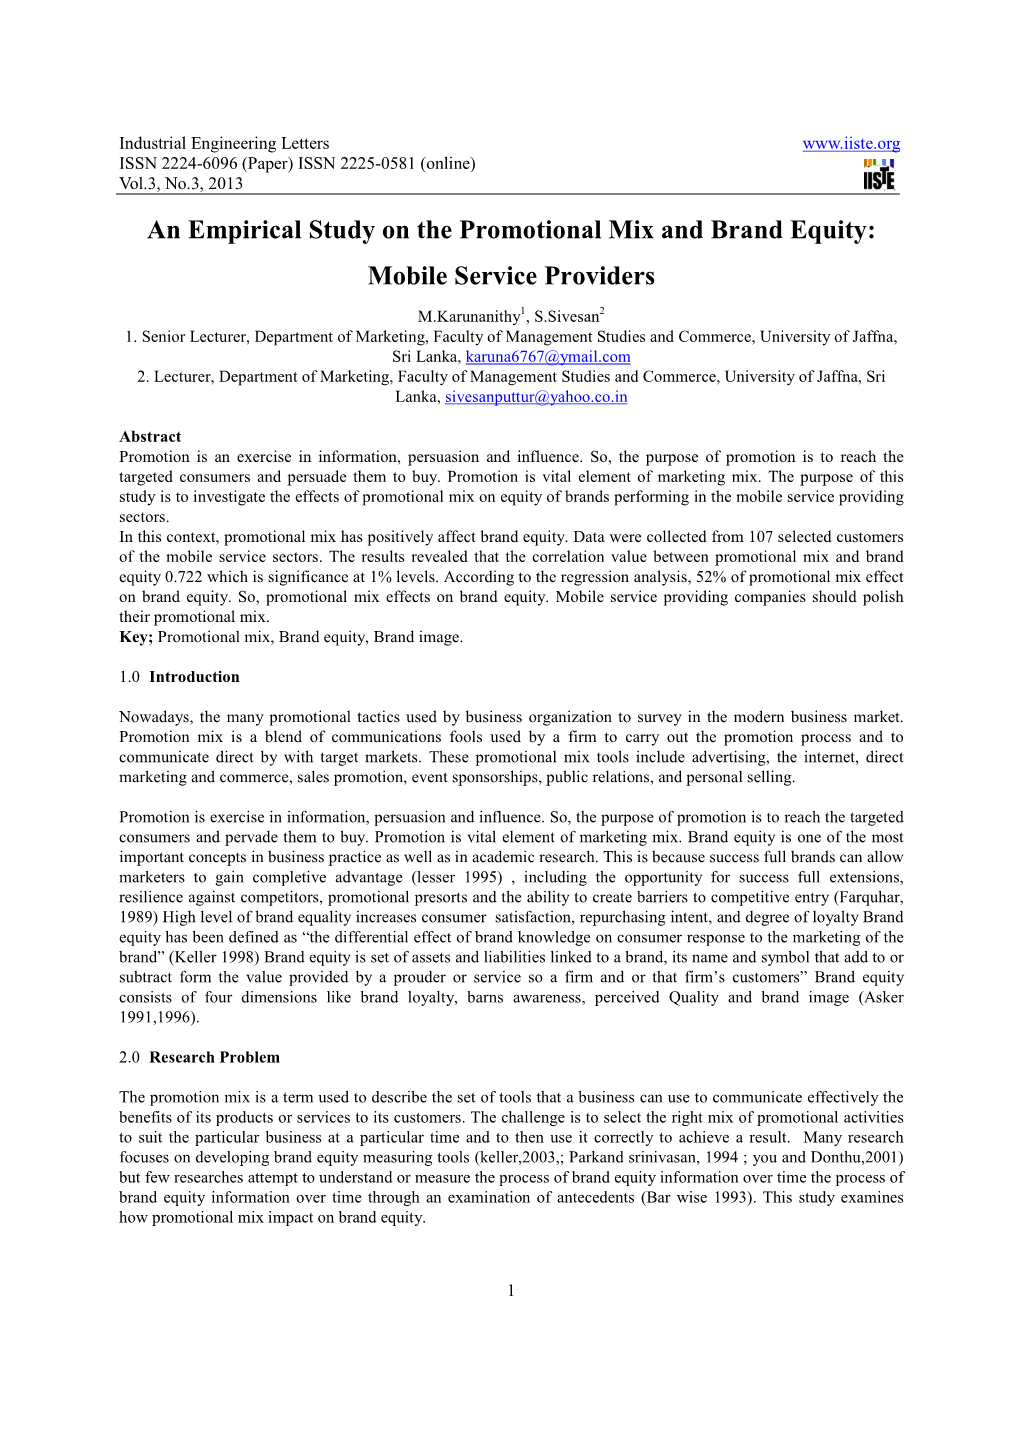 An Empirical Study on the Promotional Mix and Brand Equity: Mobile Service Providers